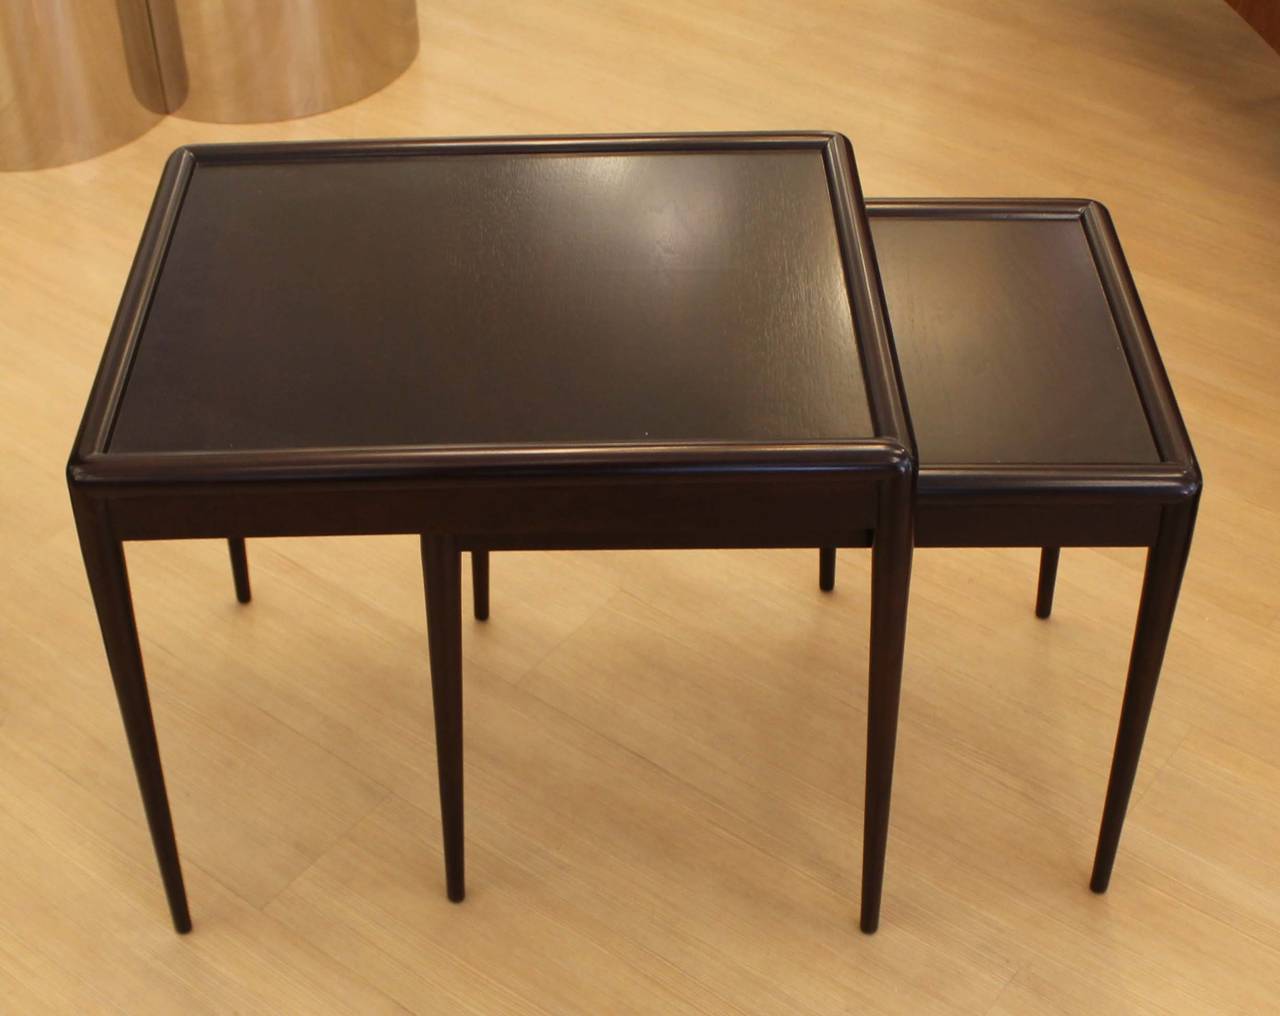 Pair of 1950s Robsjohn-Gibbings for Widdicomb nesting tables. Simple and elegant design featuring a framed top and tapered legs. Finished in a lacquered semi-matte dark walnut stain. Marked under the top. Measurements below are for the largest table.